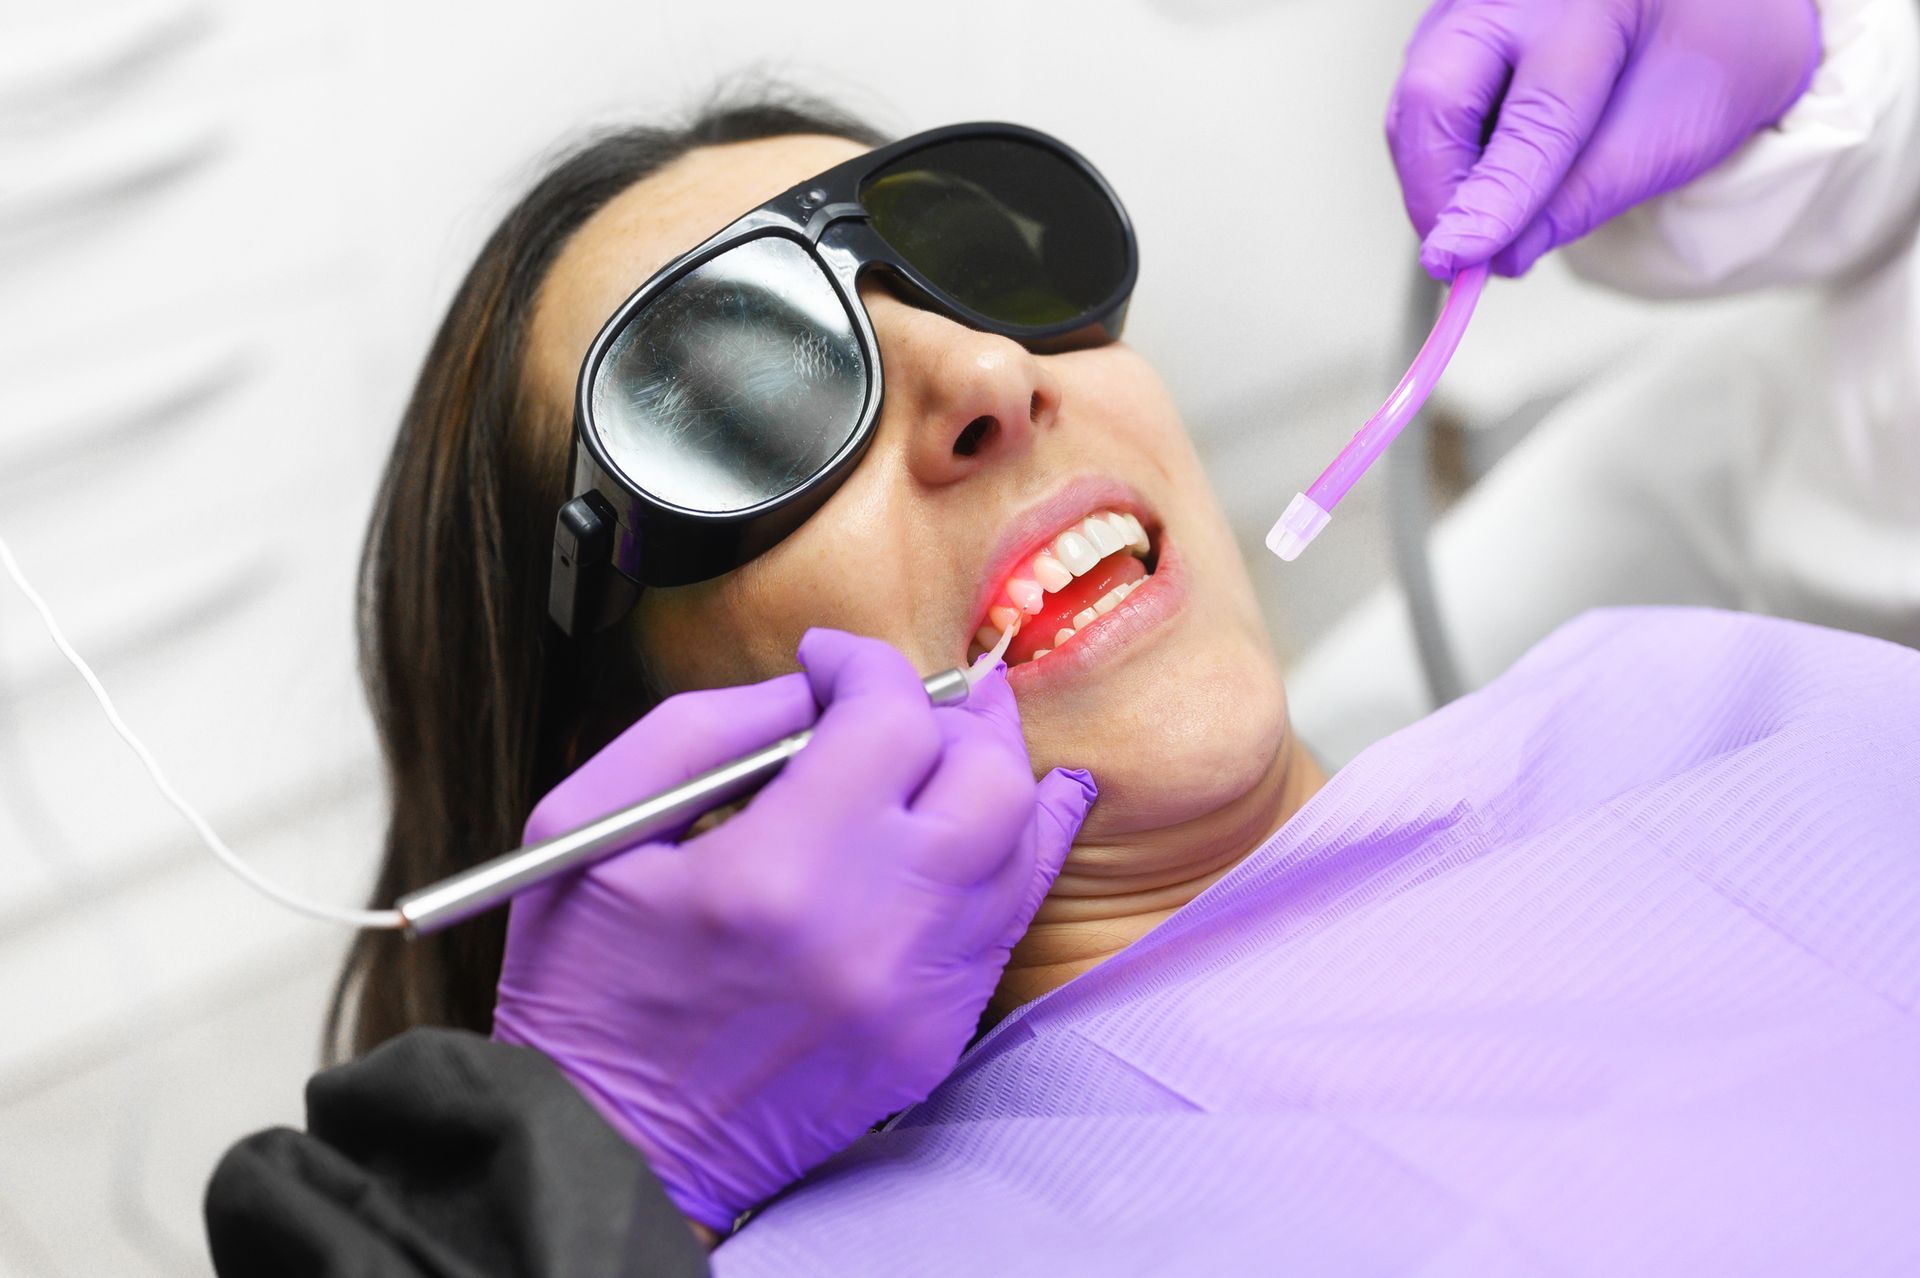 A woman wearing sunglasses is getting her teeth examined by a dentist.